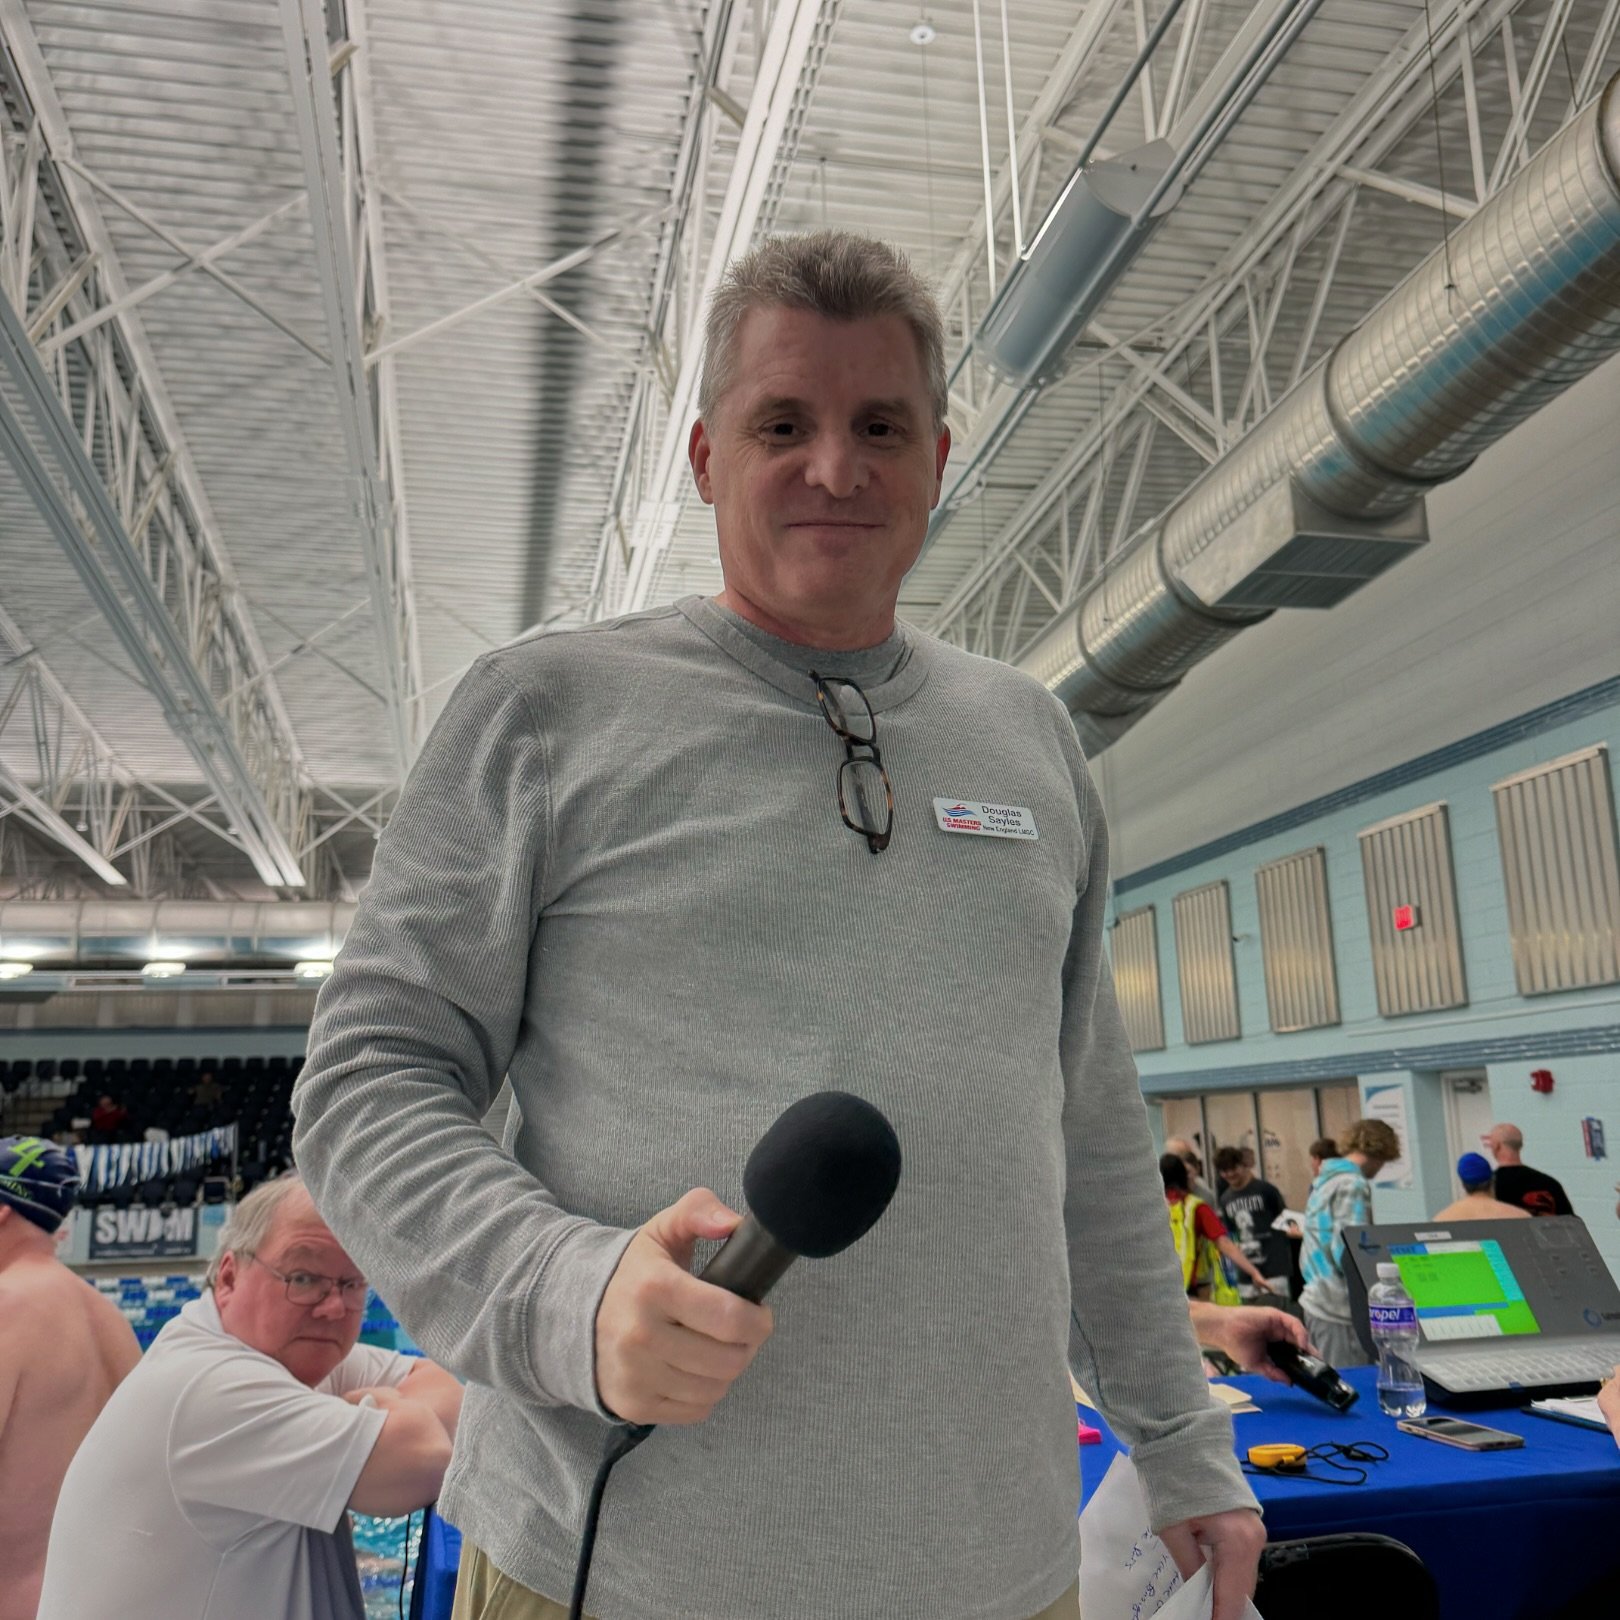 The one, the only! #meetdirector #colonieszone #mastersswimming